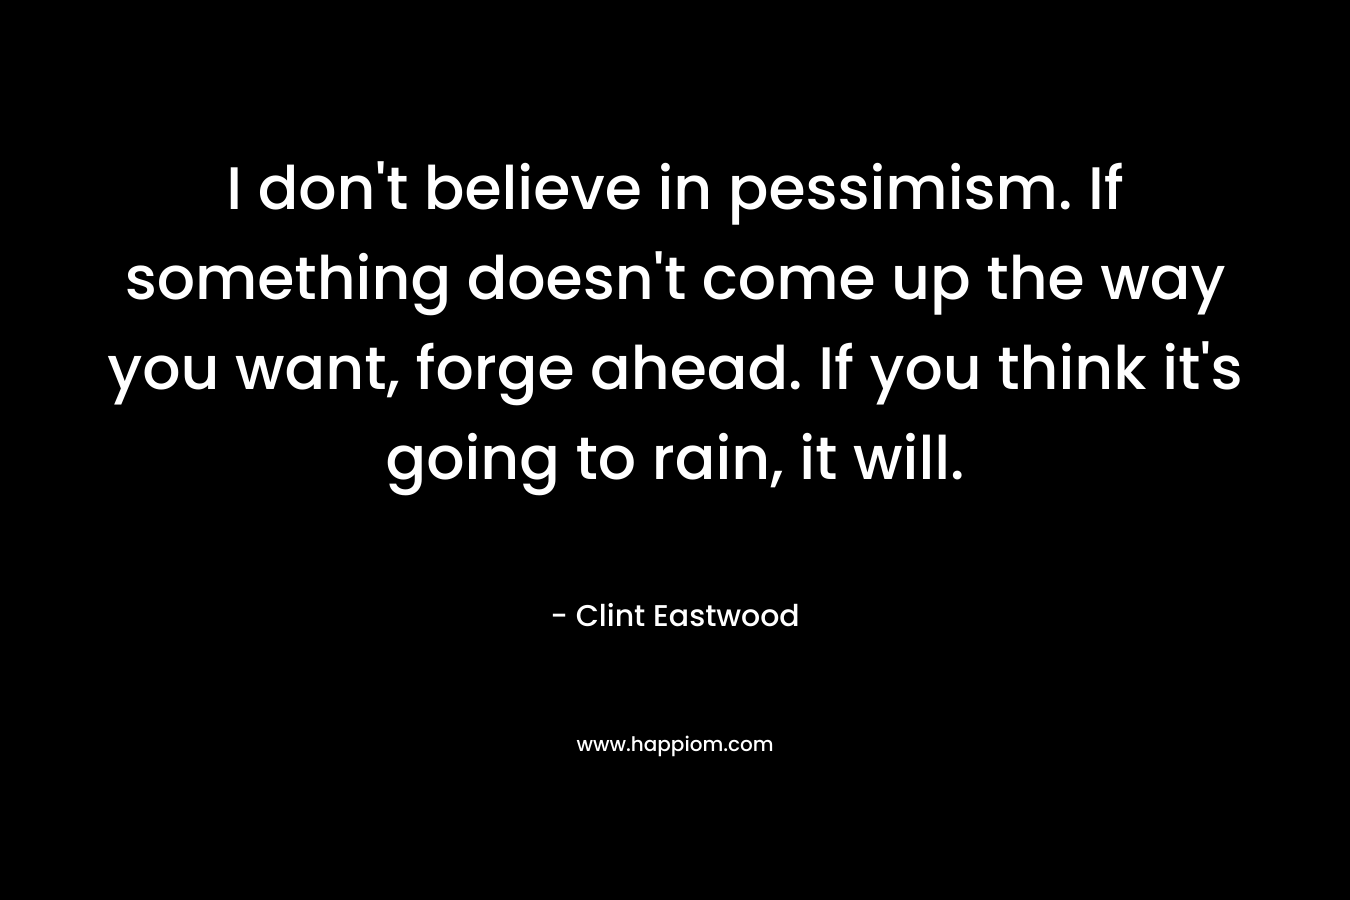 I don’t believe in pessimism. If something doesn’t come up the way you want, forge ahead. If you think it’s going to rain, it will. – Clint Eastwood